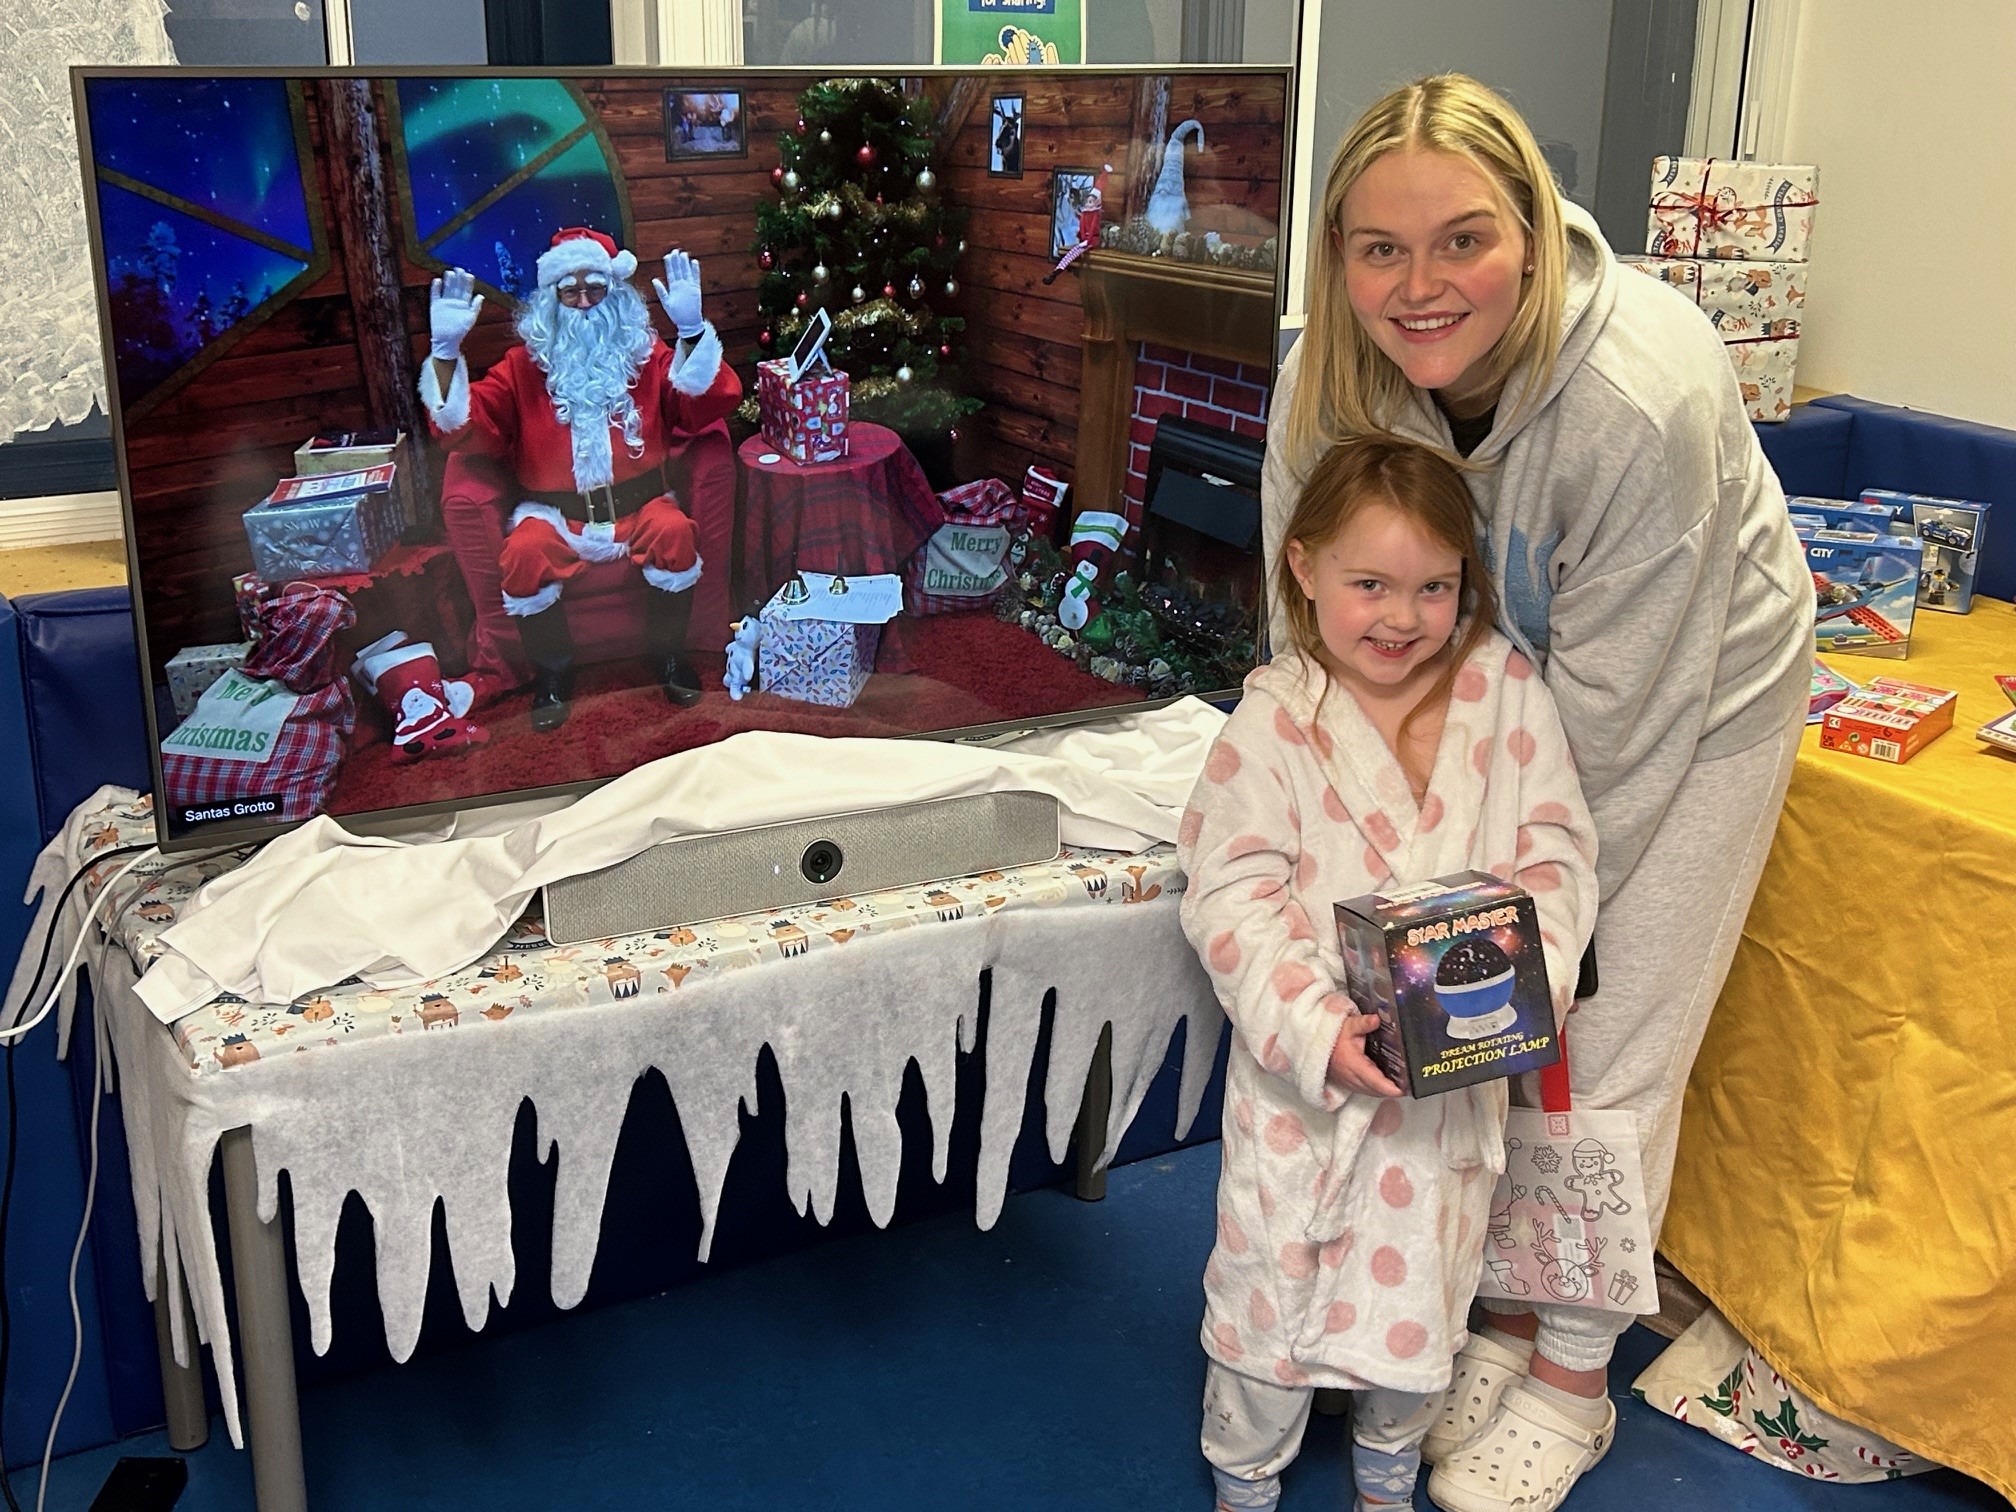 Photo of a mother and her young daughter standing next to a TV which shows Santa Claus on a remote video connection